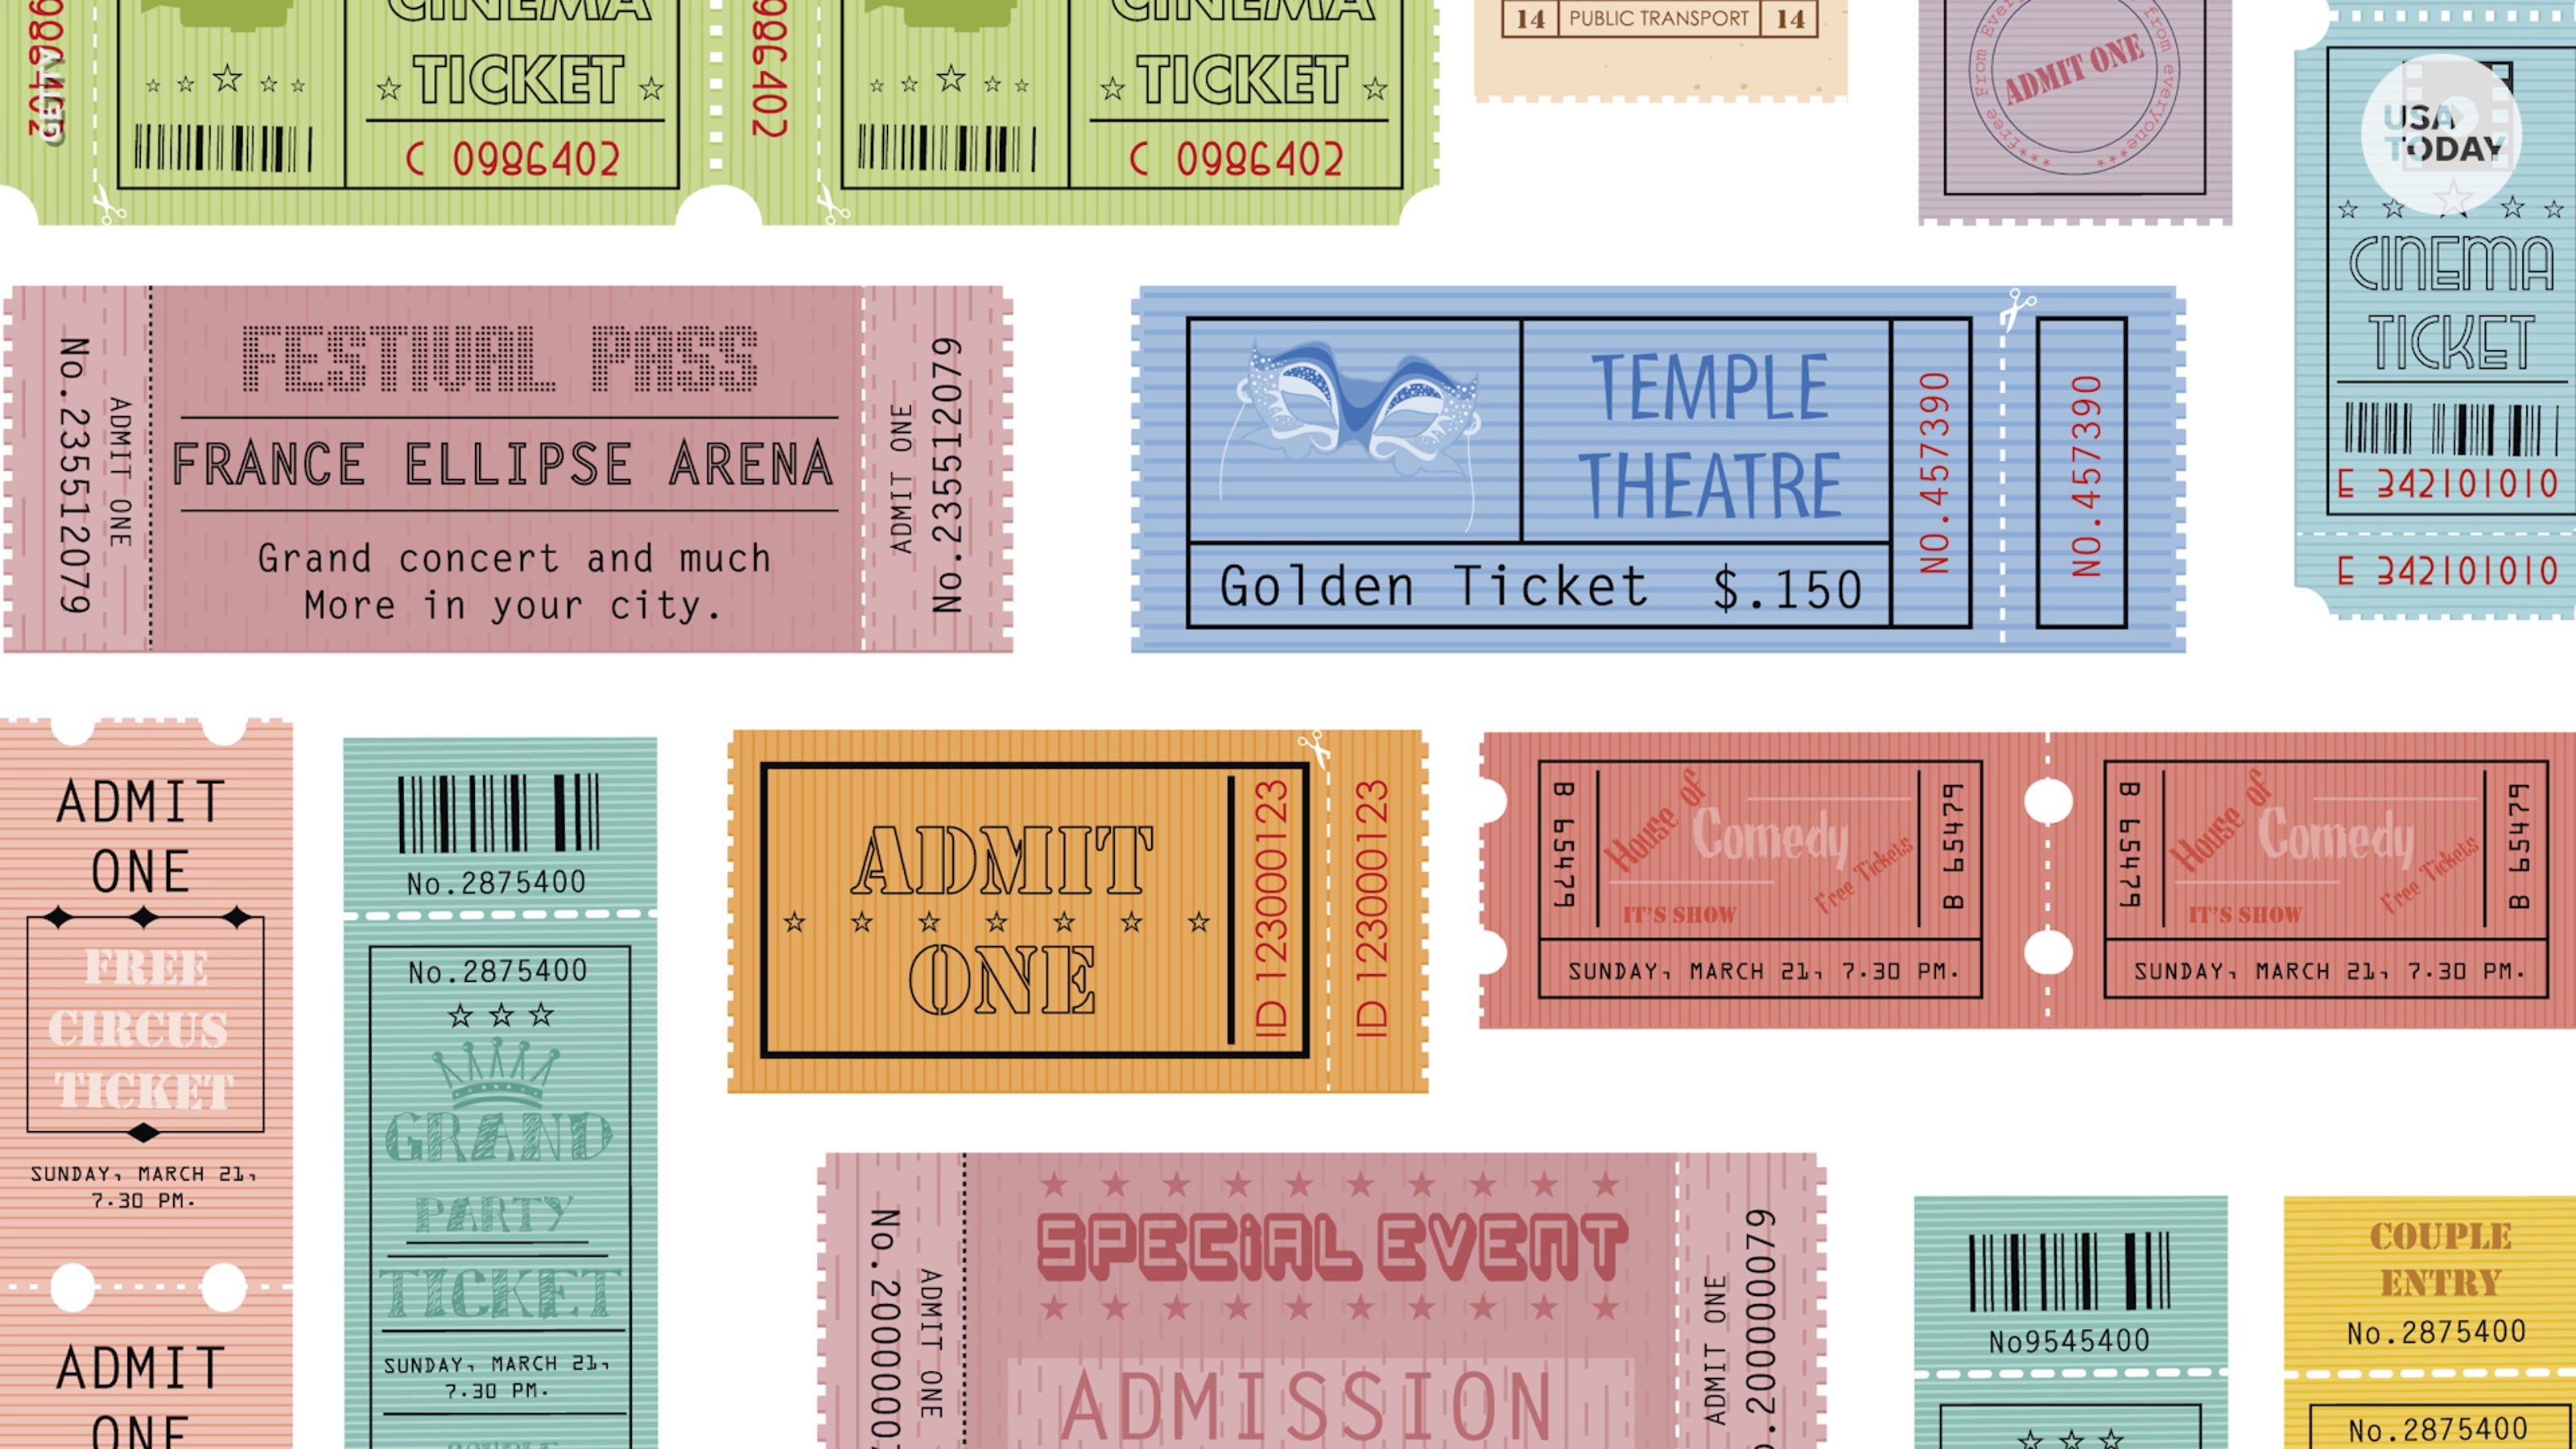 Ticket to the Theatre. Old movie tickets. Tickets with Prices. Tickets with Prices pounds.